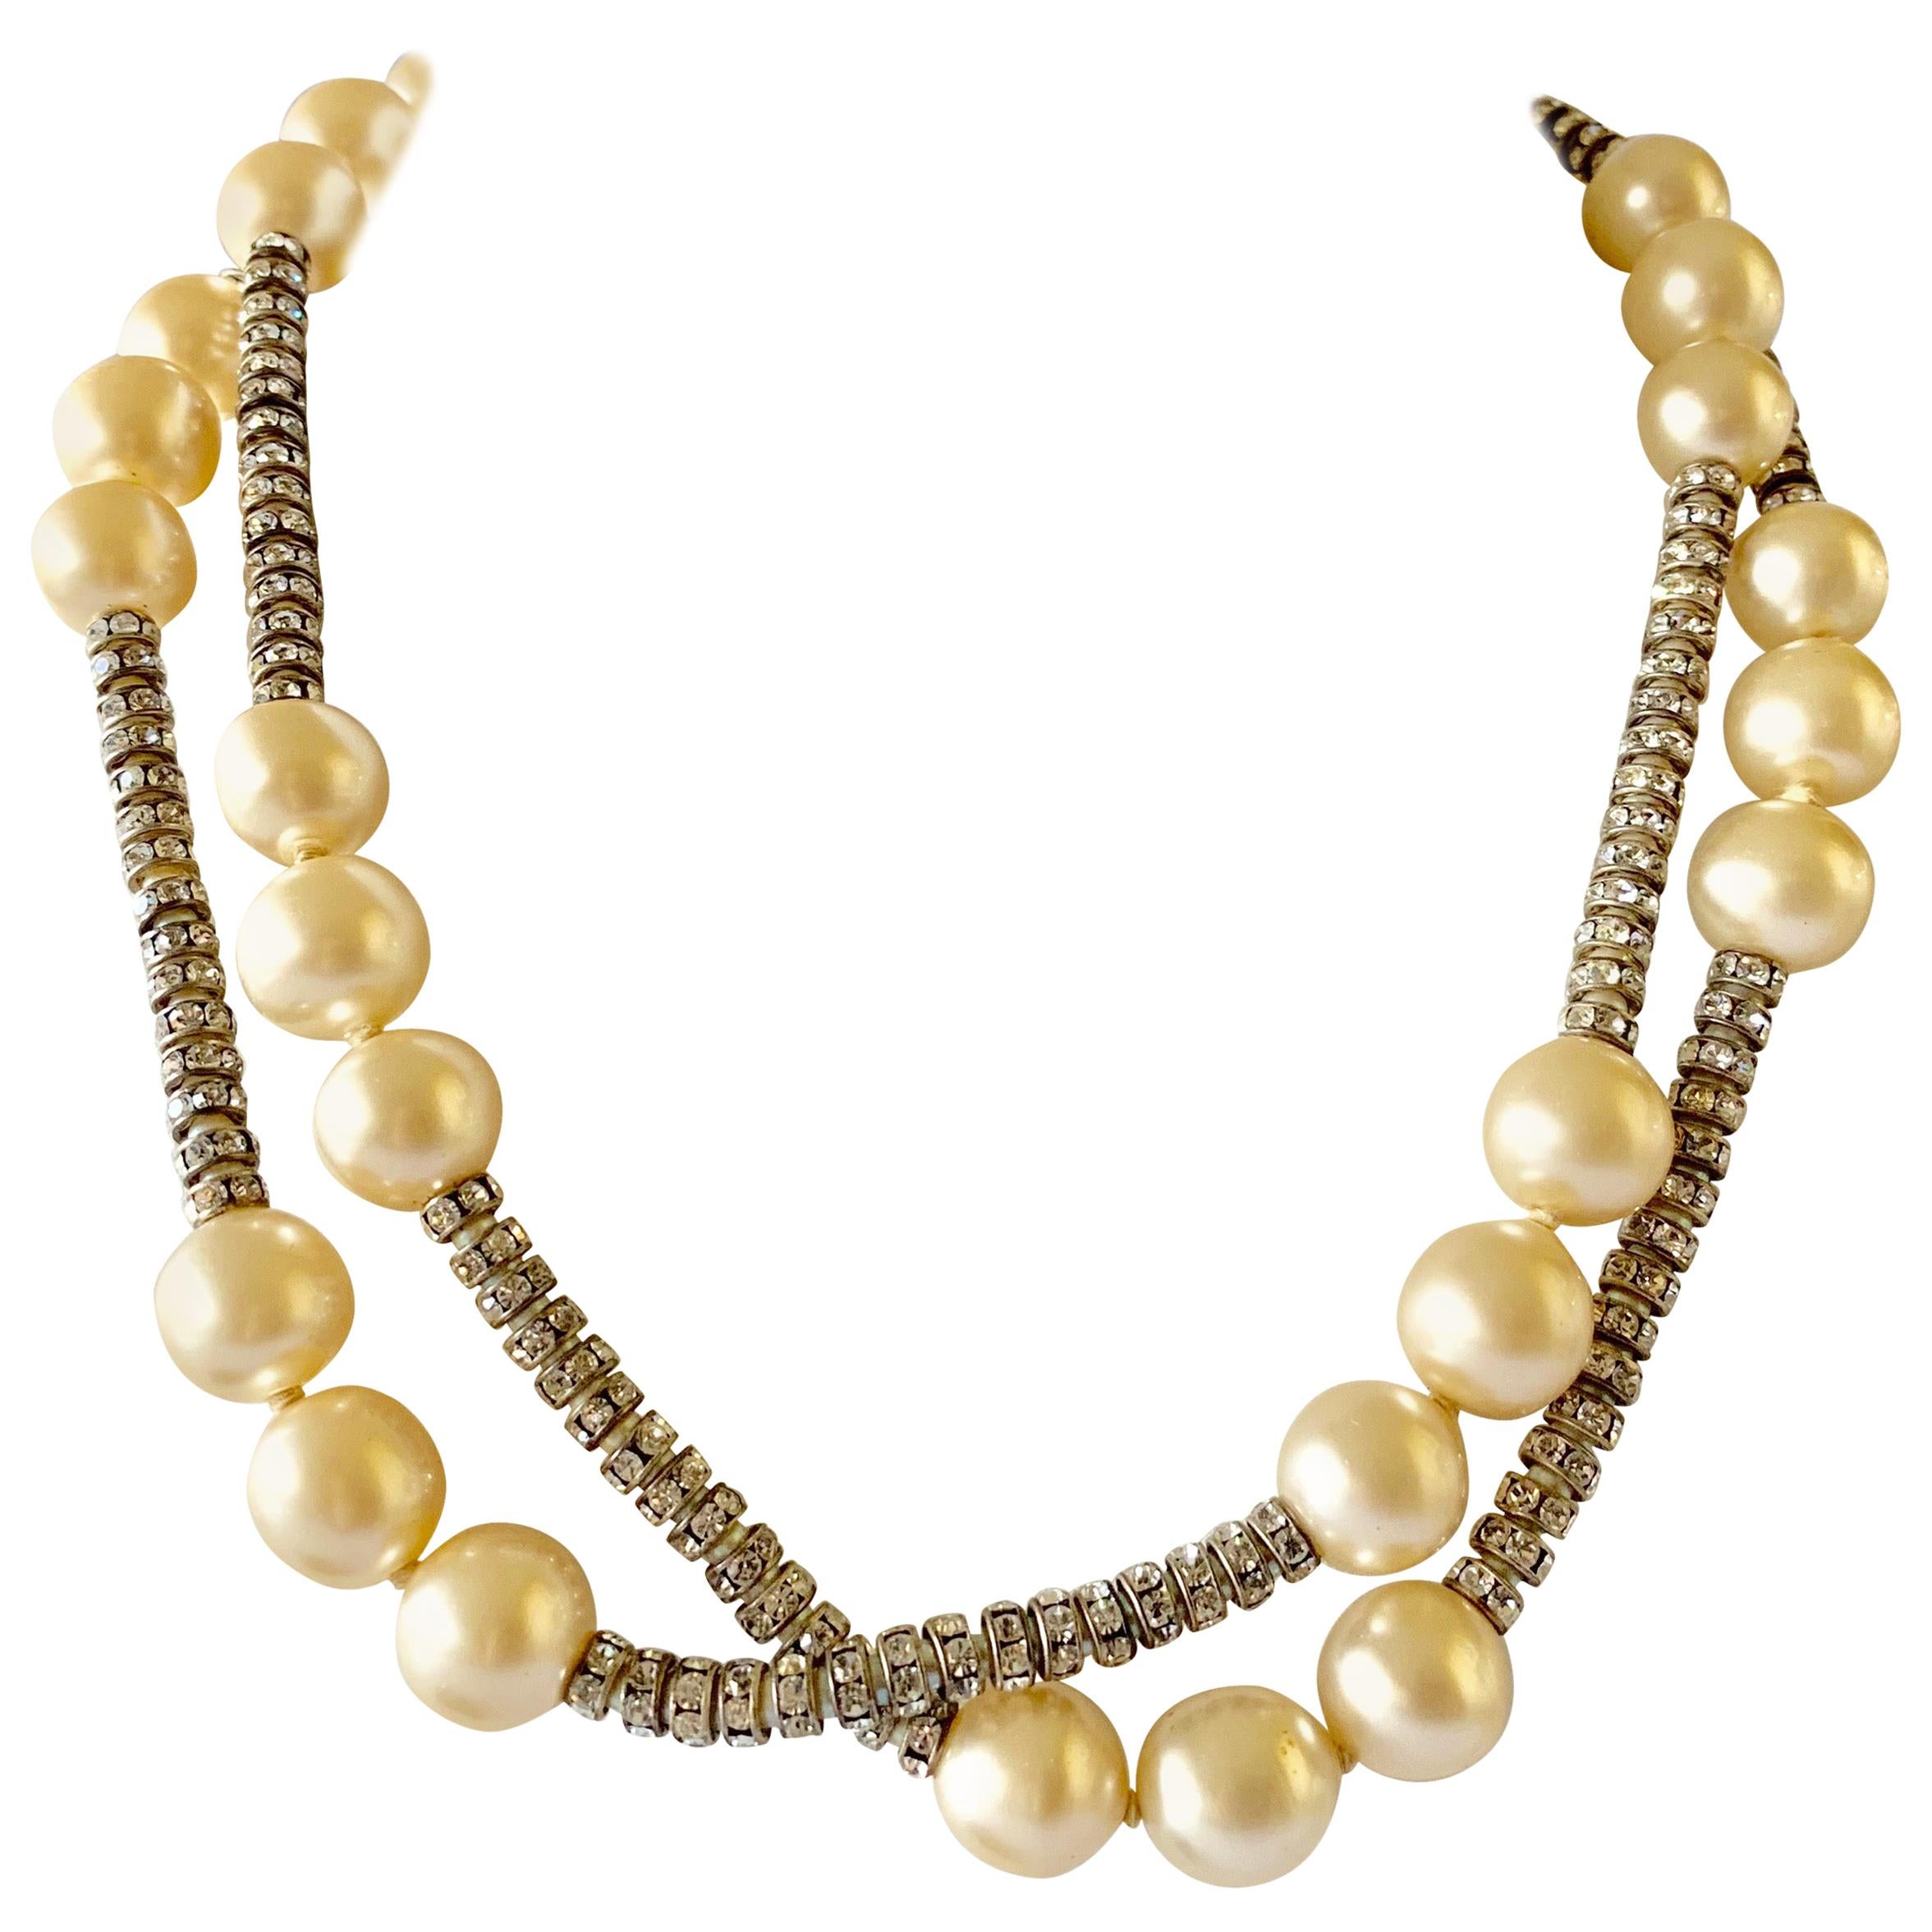 Vintage Coco Chanel Fall/Winter 1993 Diamanté and Pearl Necklace 